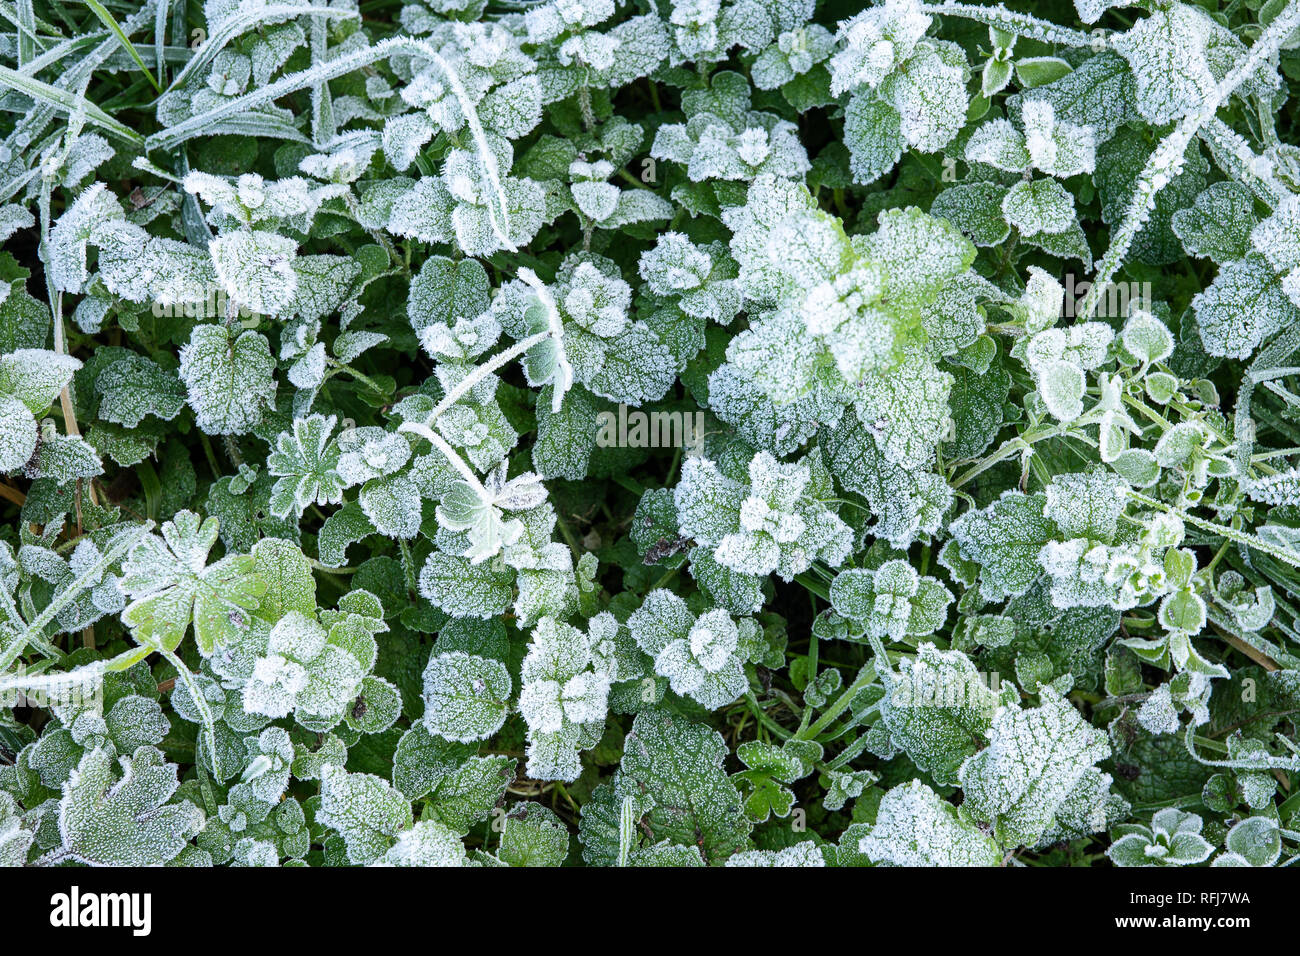 Winter nature background with leaves of wild peppermint covered with white hoar frost and ice crystal formation Stock Photo